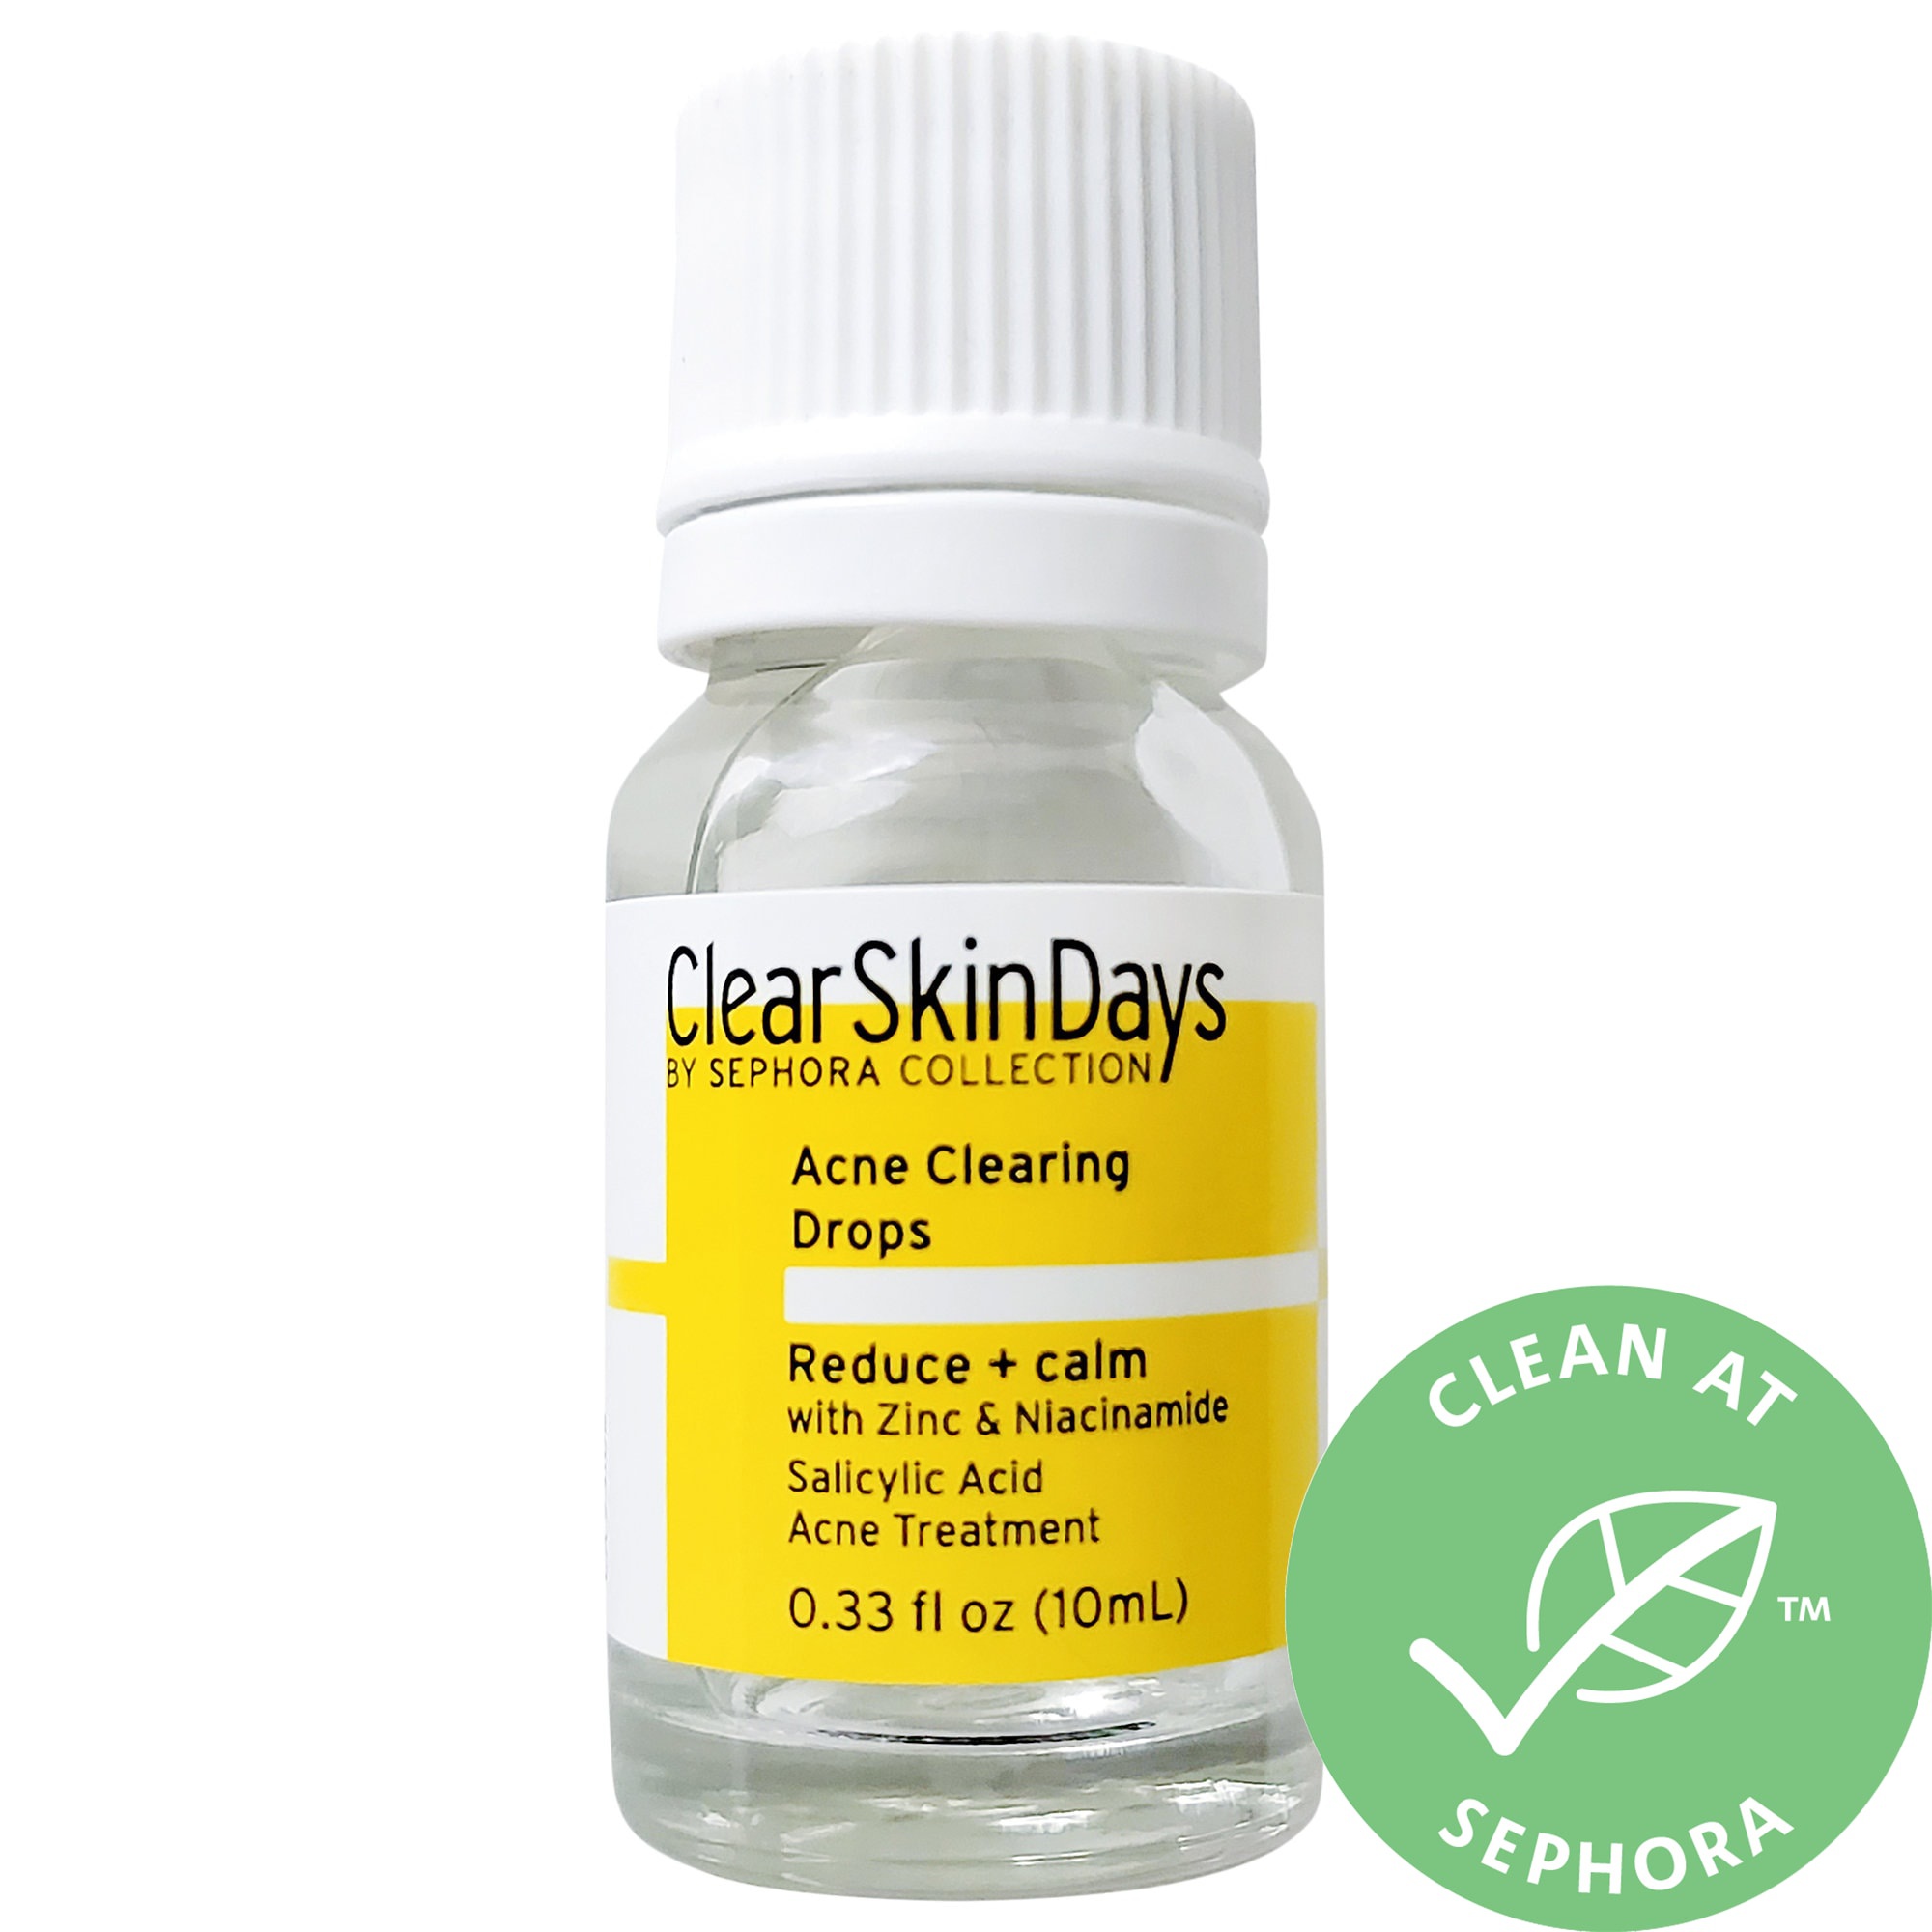 SEPHORA COLLECTION Clear Skin Days Acne Clearing Drops